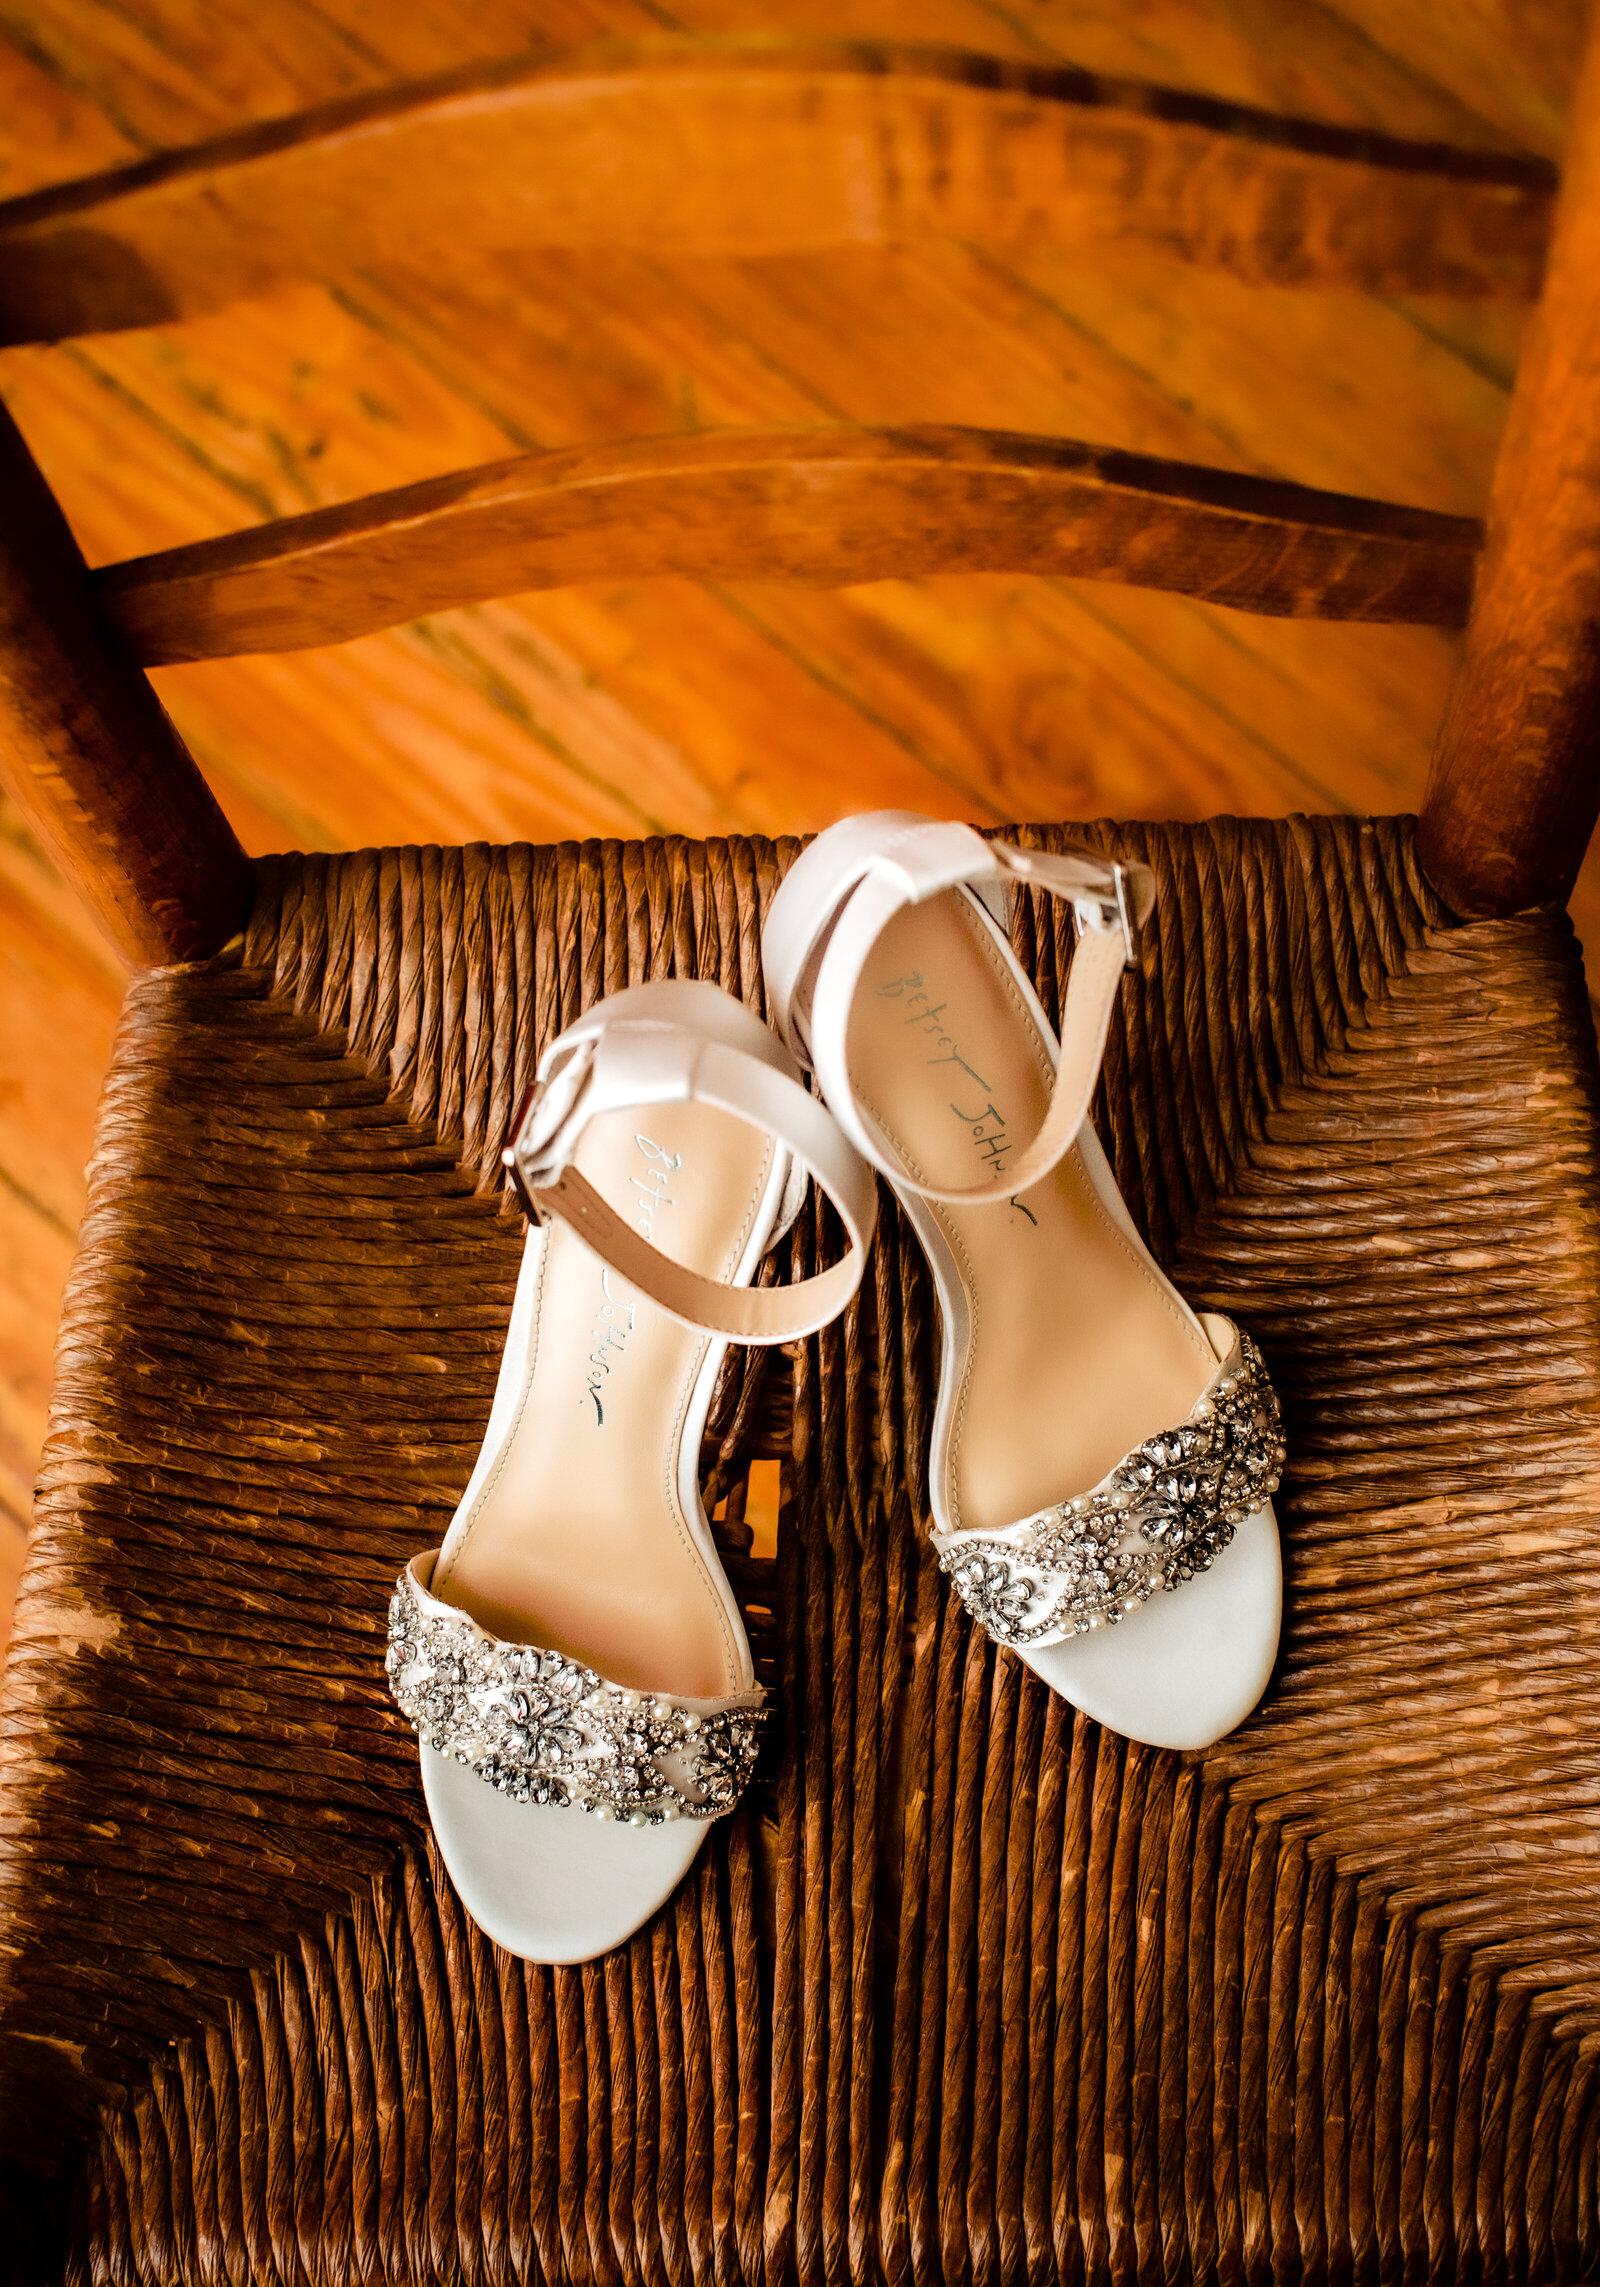 bride's wedding shoes on chair